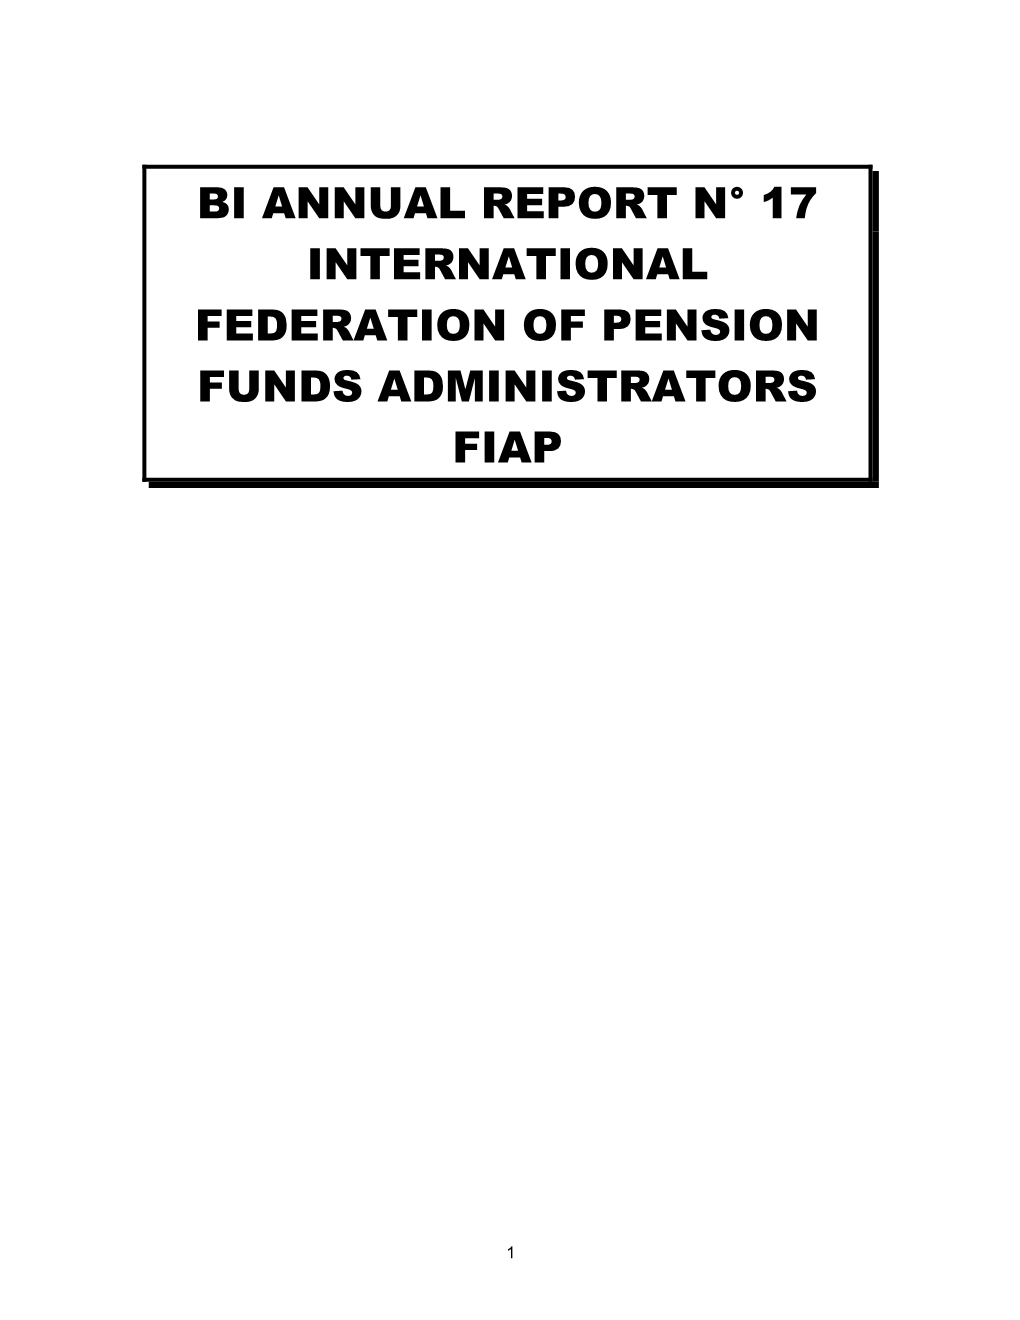 As of December 2004, the Latin American Countries with a Mandatory Pension System Presented s1